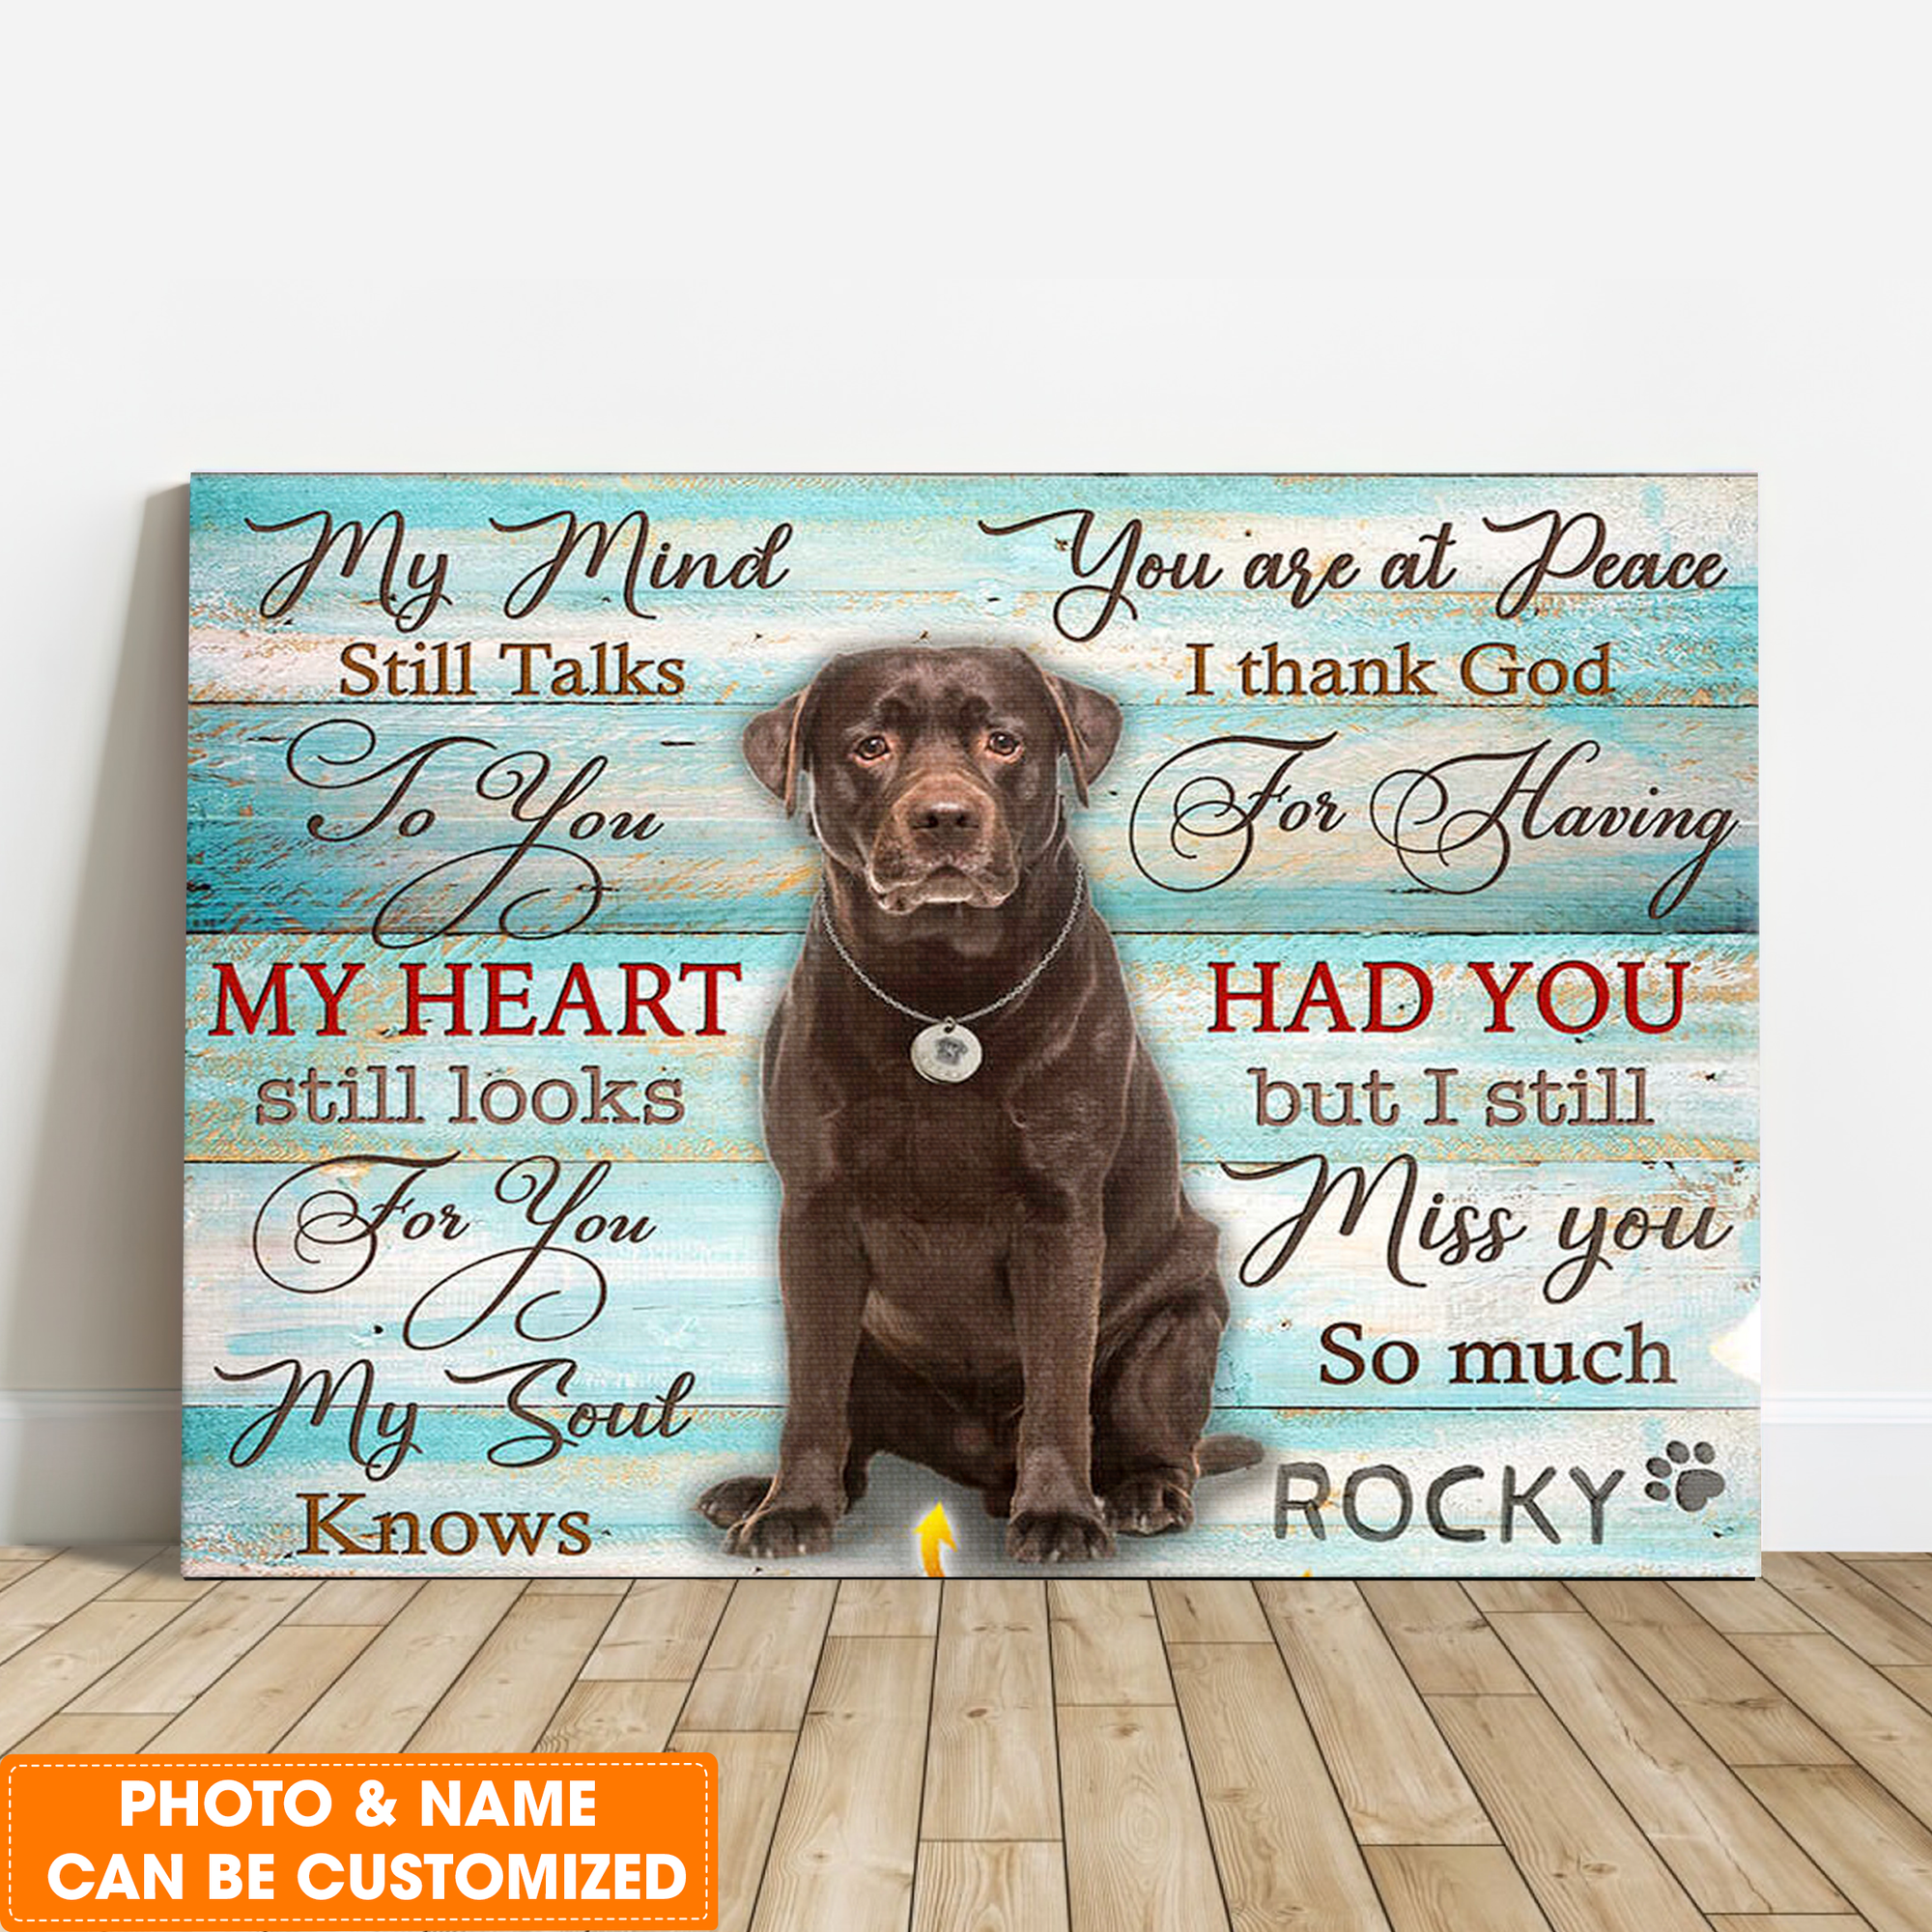 Personalized Dog Landscape Canvas, Custom Photo and Name Dog My mind still talks Canvas Wall Art Decor, Perfect Gift For Pet Lovers, Friend, Family